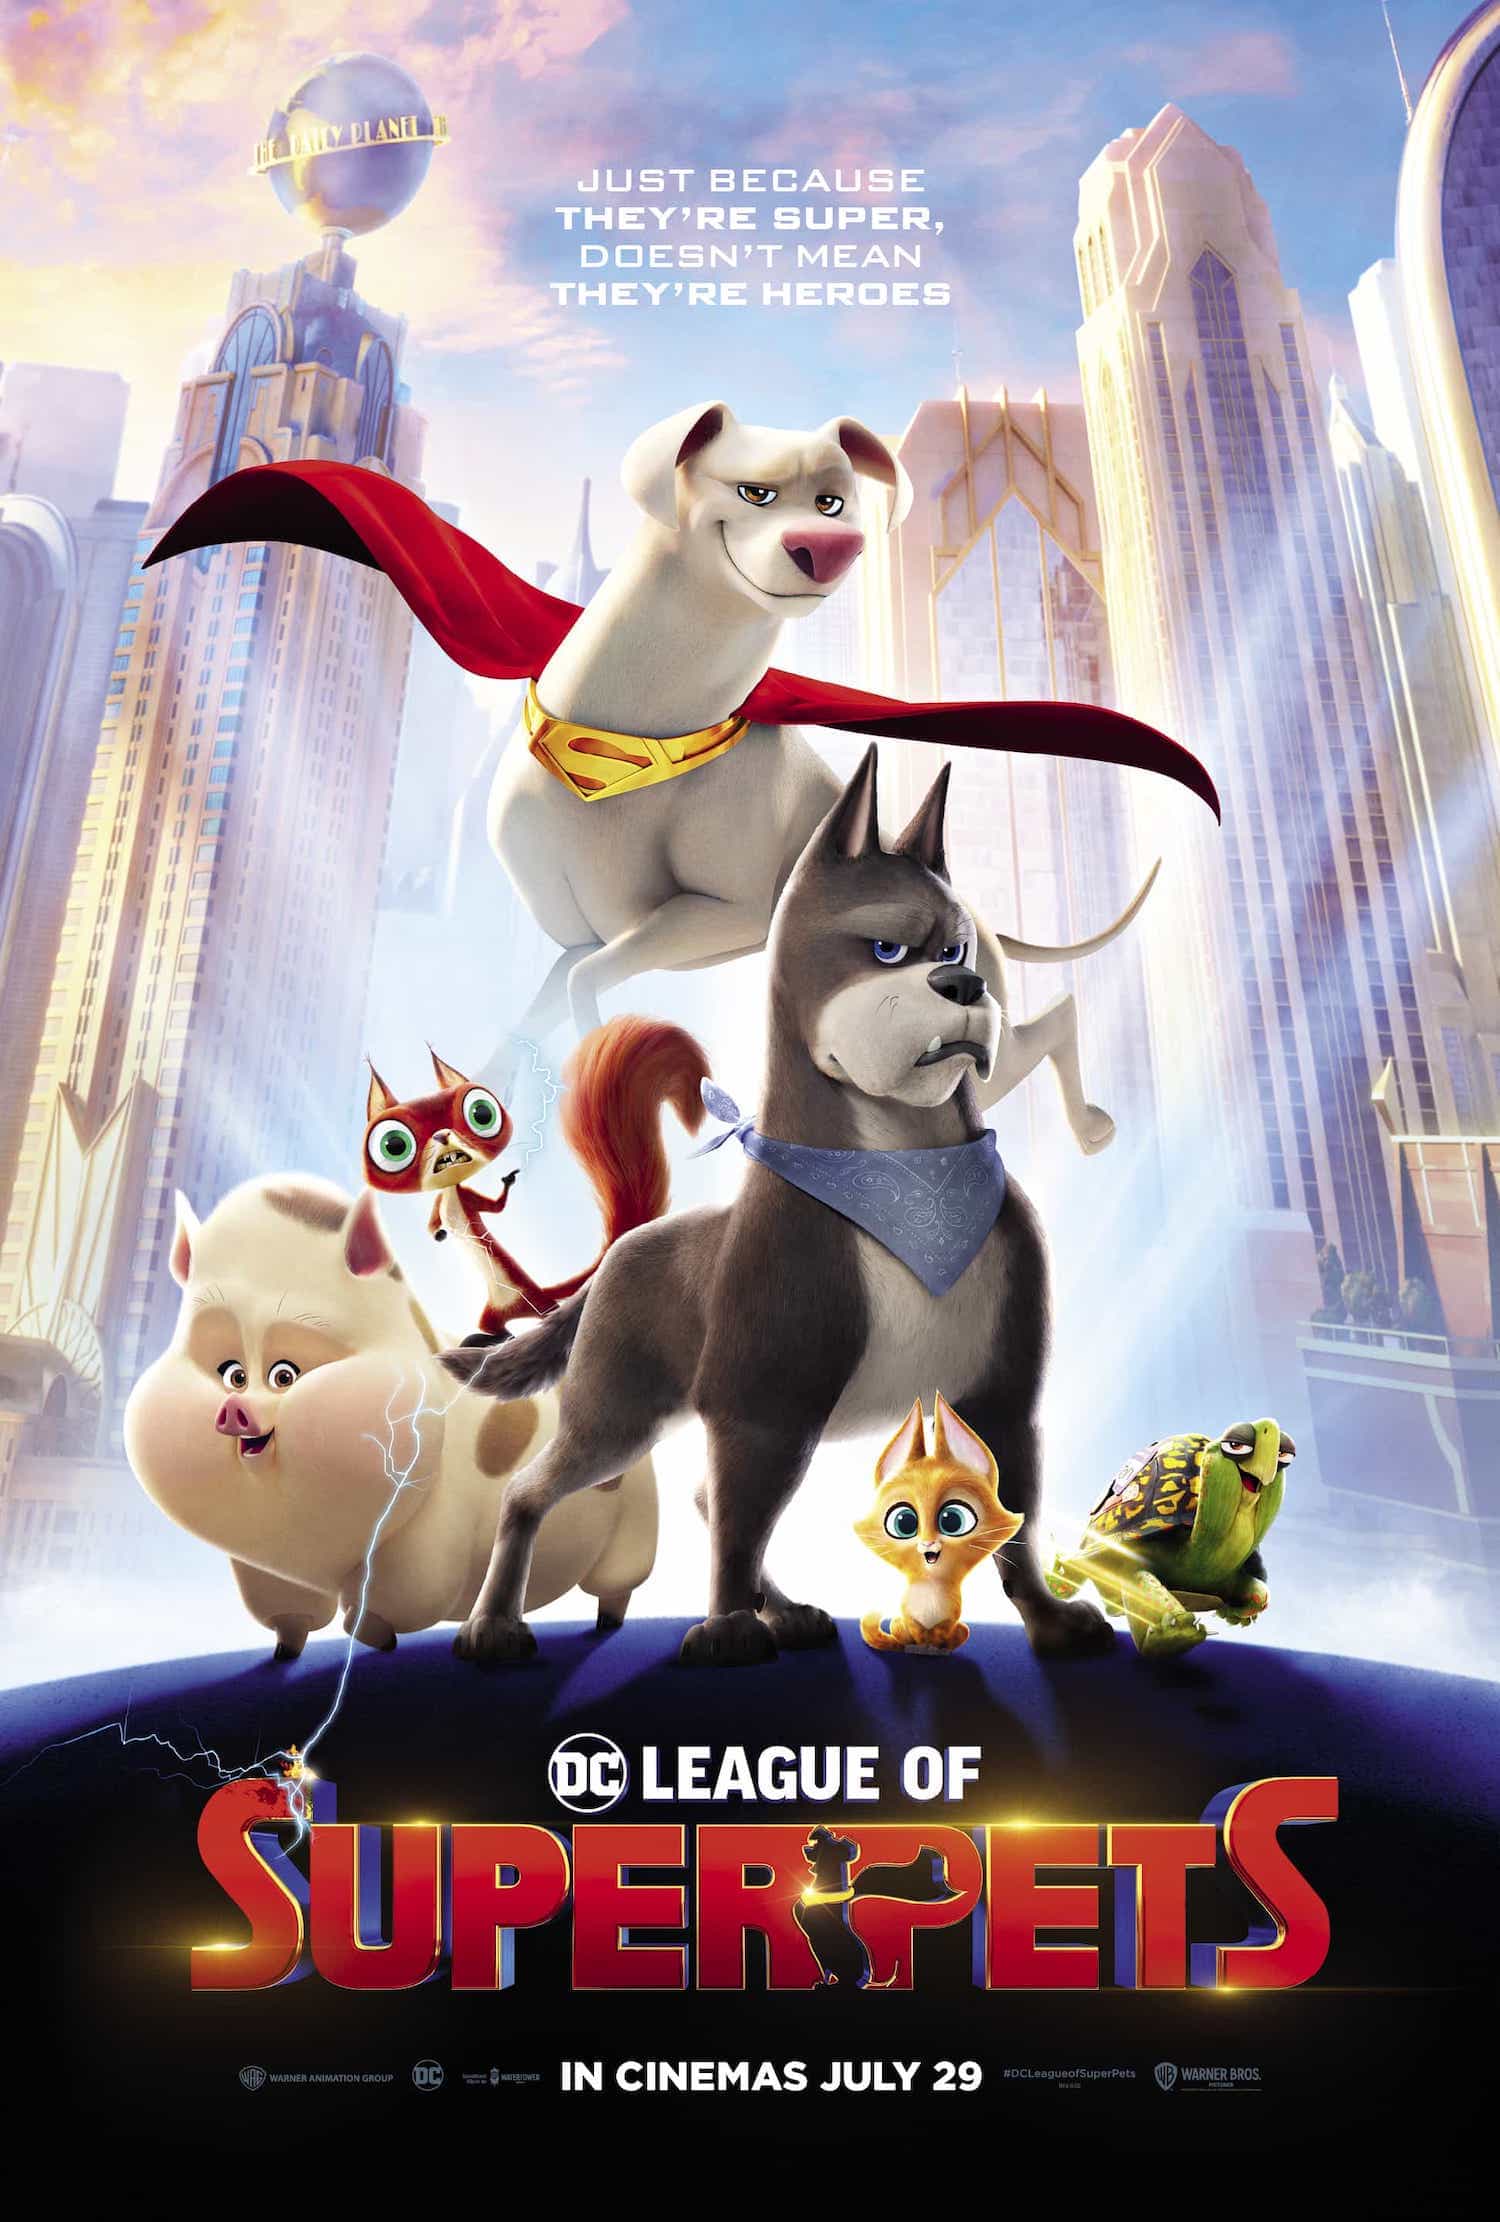 UK Box Office Figures 29th - 31st July 2022: New animated feature DC League of Super-Pets makes its debut at the top with nearly £2.5 Million